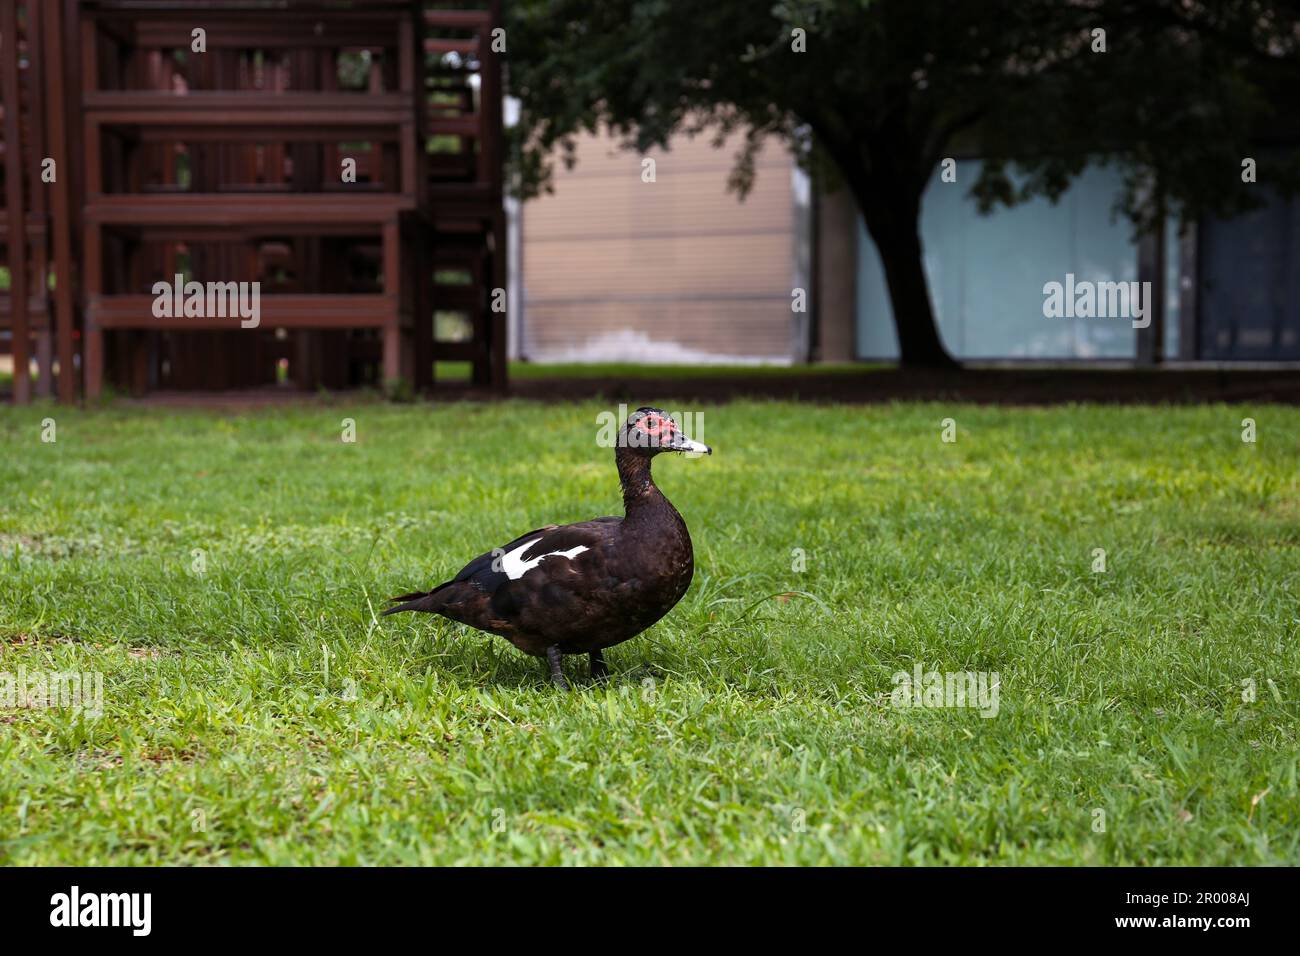 One black Muscovy duck on green lawn Stock Photo